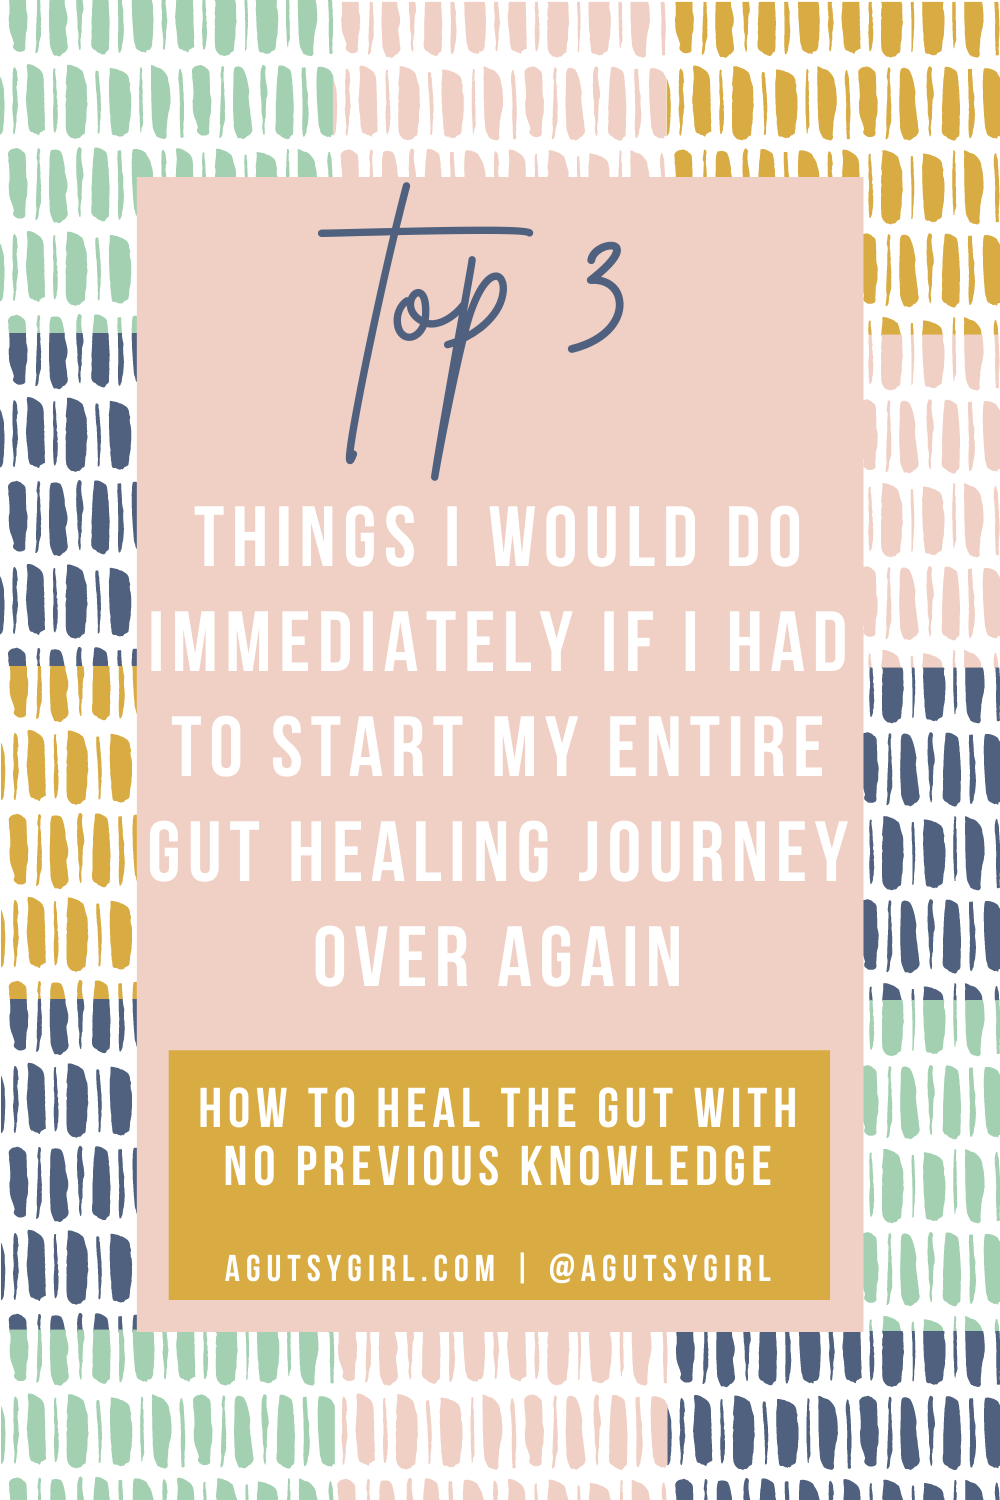 Am I Sick How to Heal the gut with no previous knowledge agutsygirl.com #guthealth #guthealing #stomachache